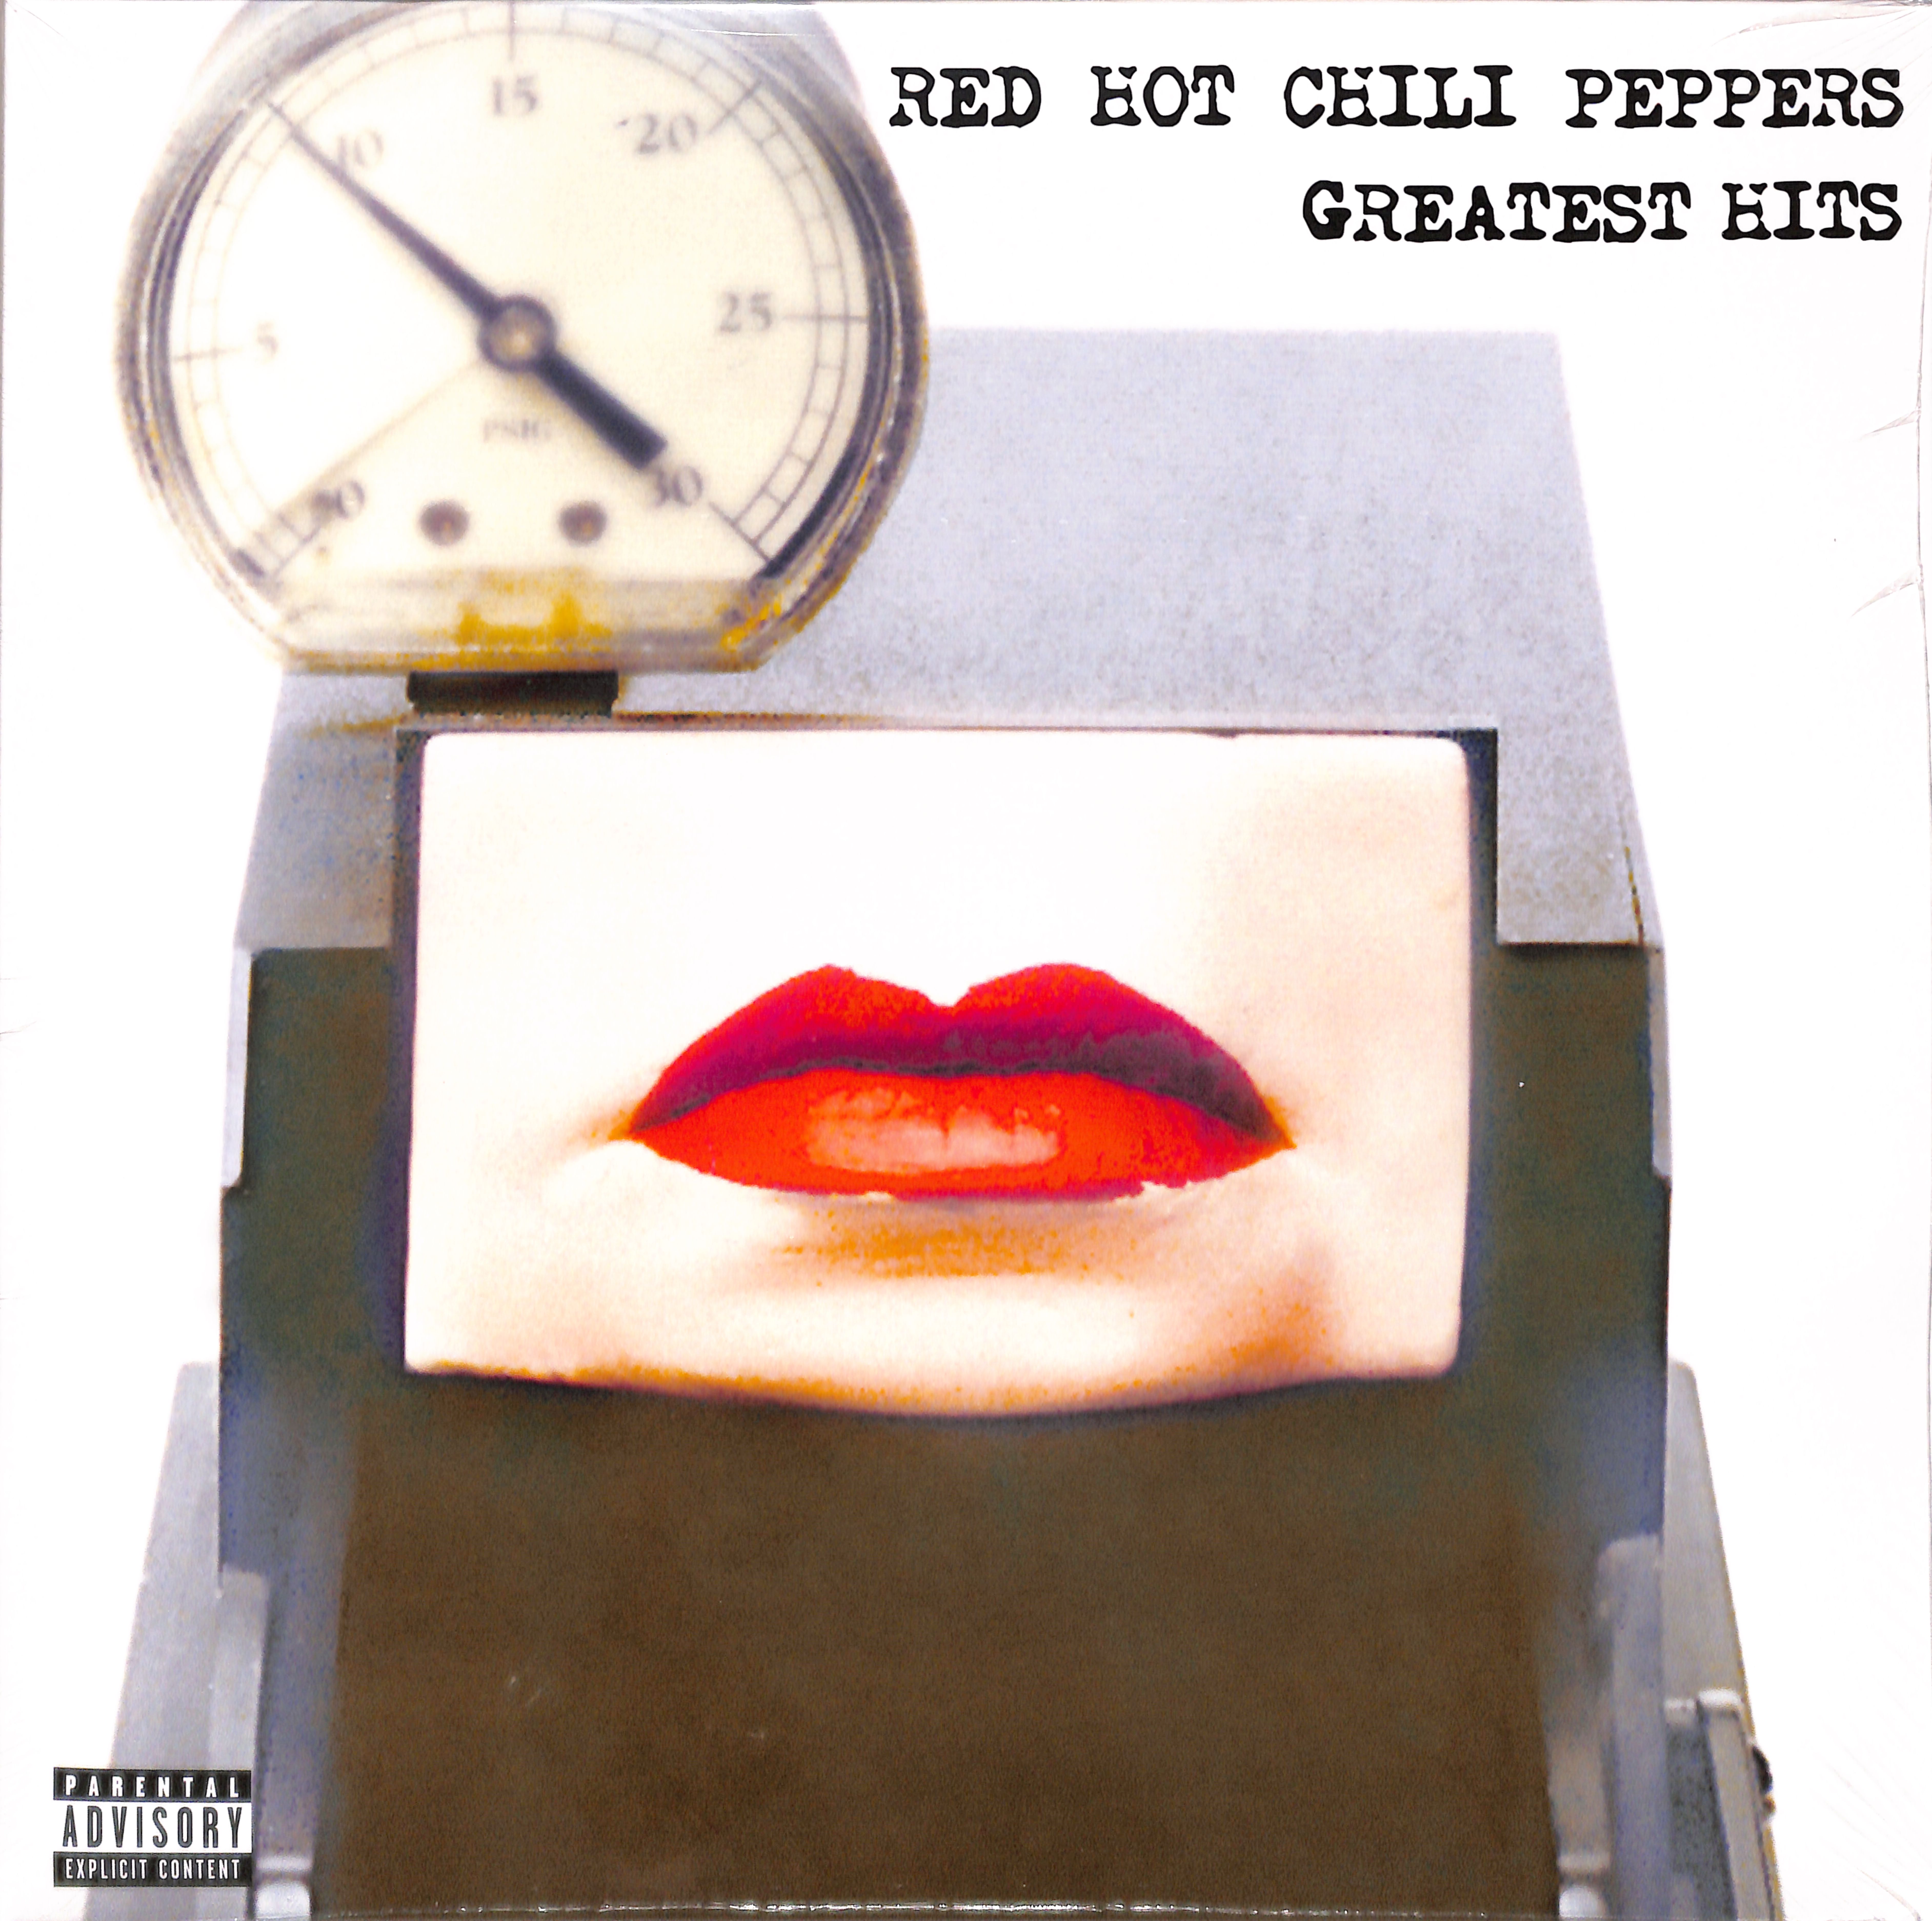 Red Hot Chili Peppers - GREATEST HITS